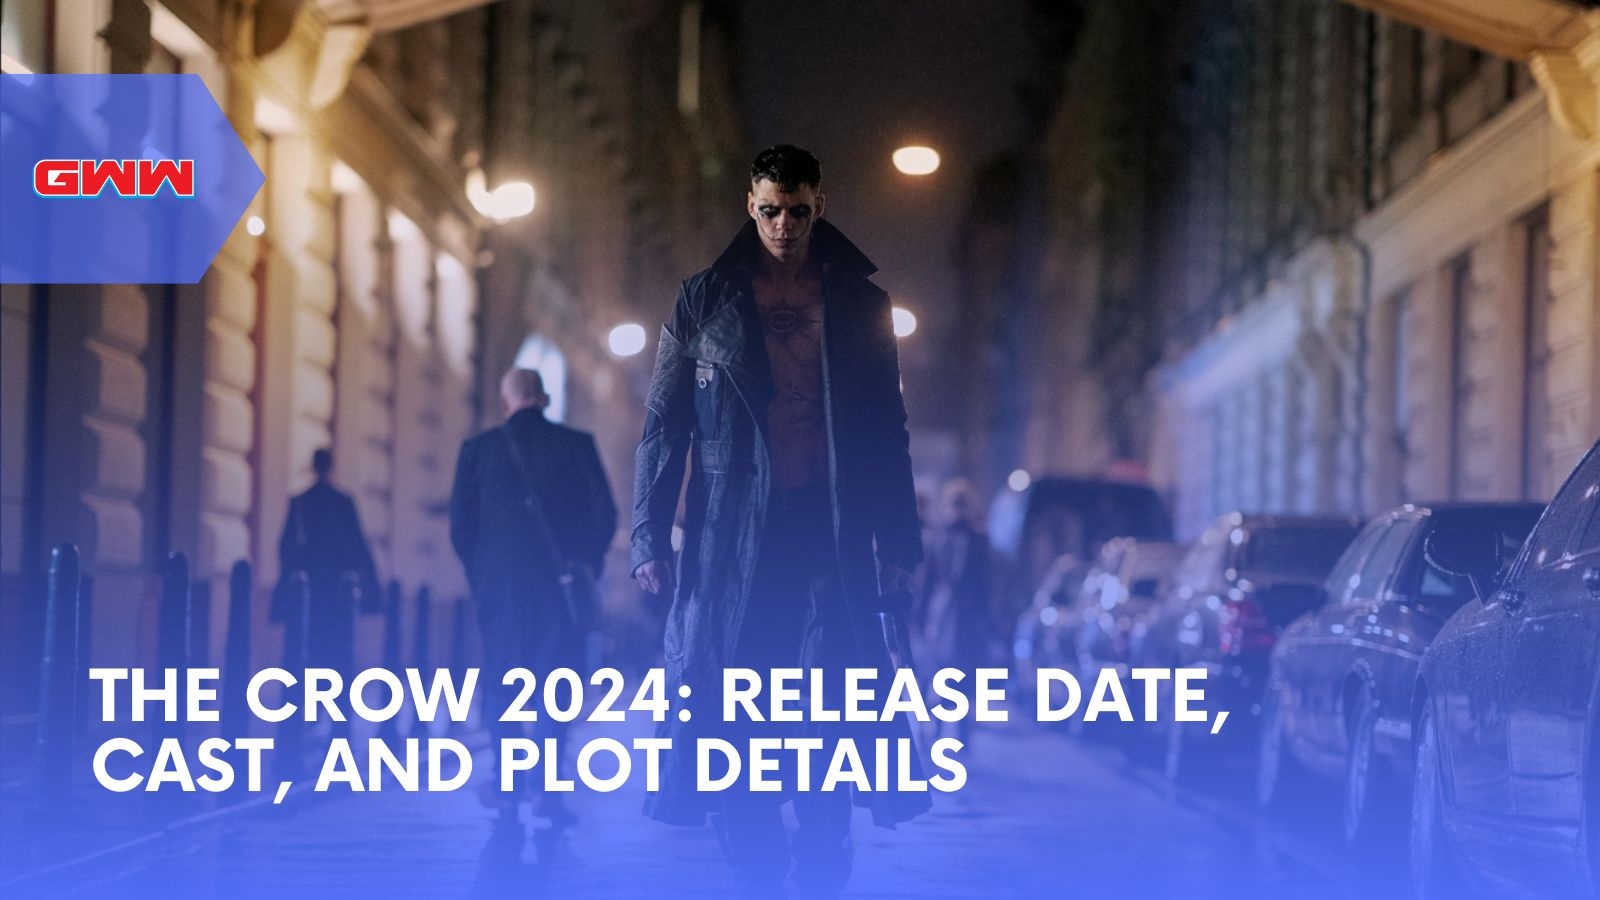 The Crow 2024: Release Date, Cast, and Plot Details